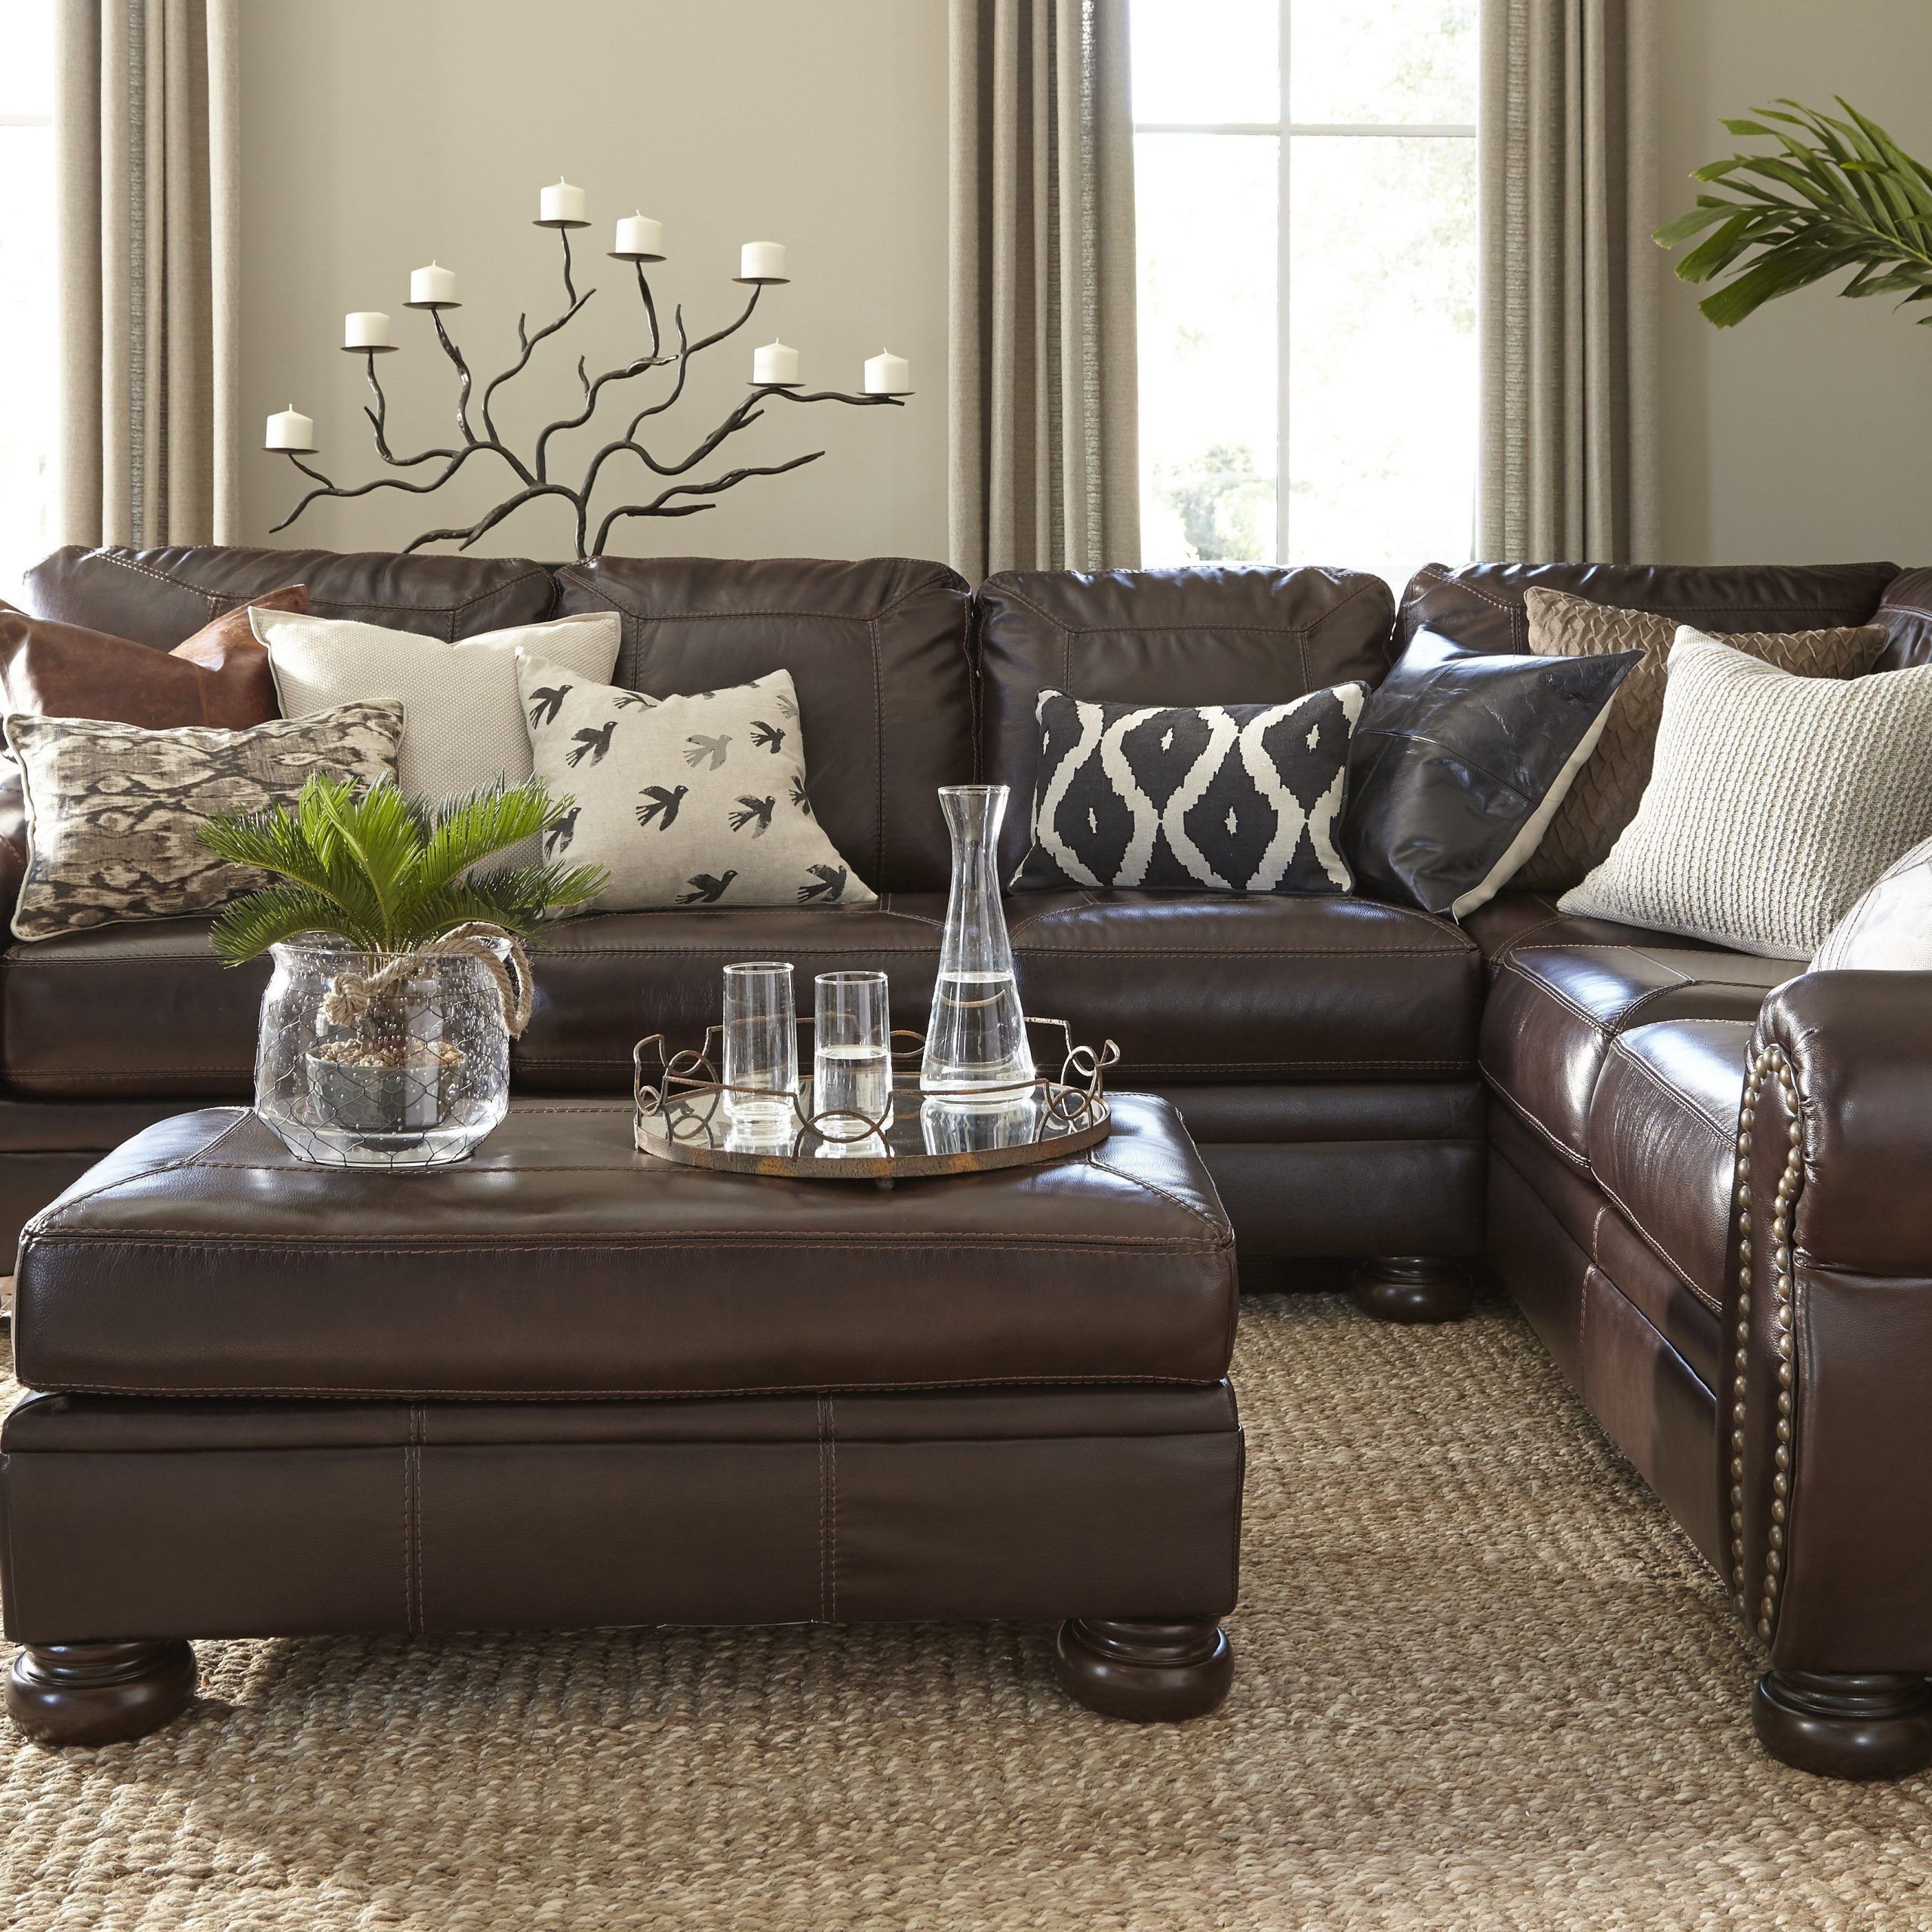 Faux Leather Sofas In Chocolate Brown Regarding Popular Chocolate Brown Leather Sofas – Sofa Living Room Ideas (View 14 of 15)